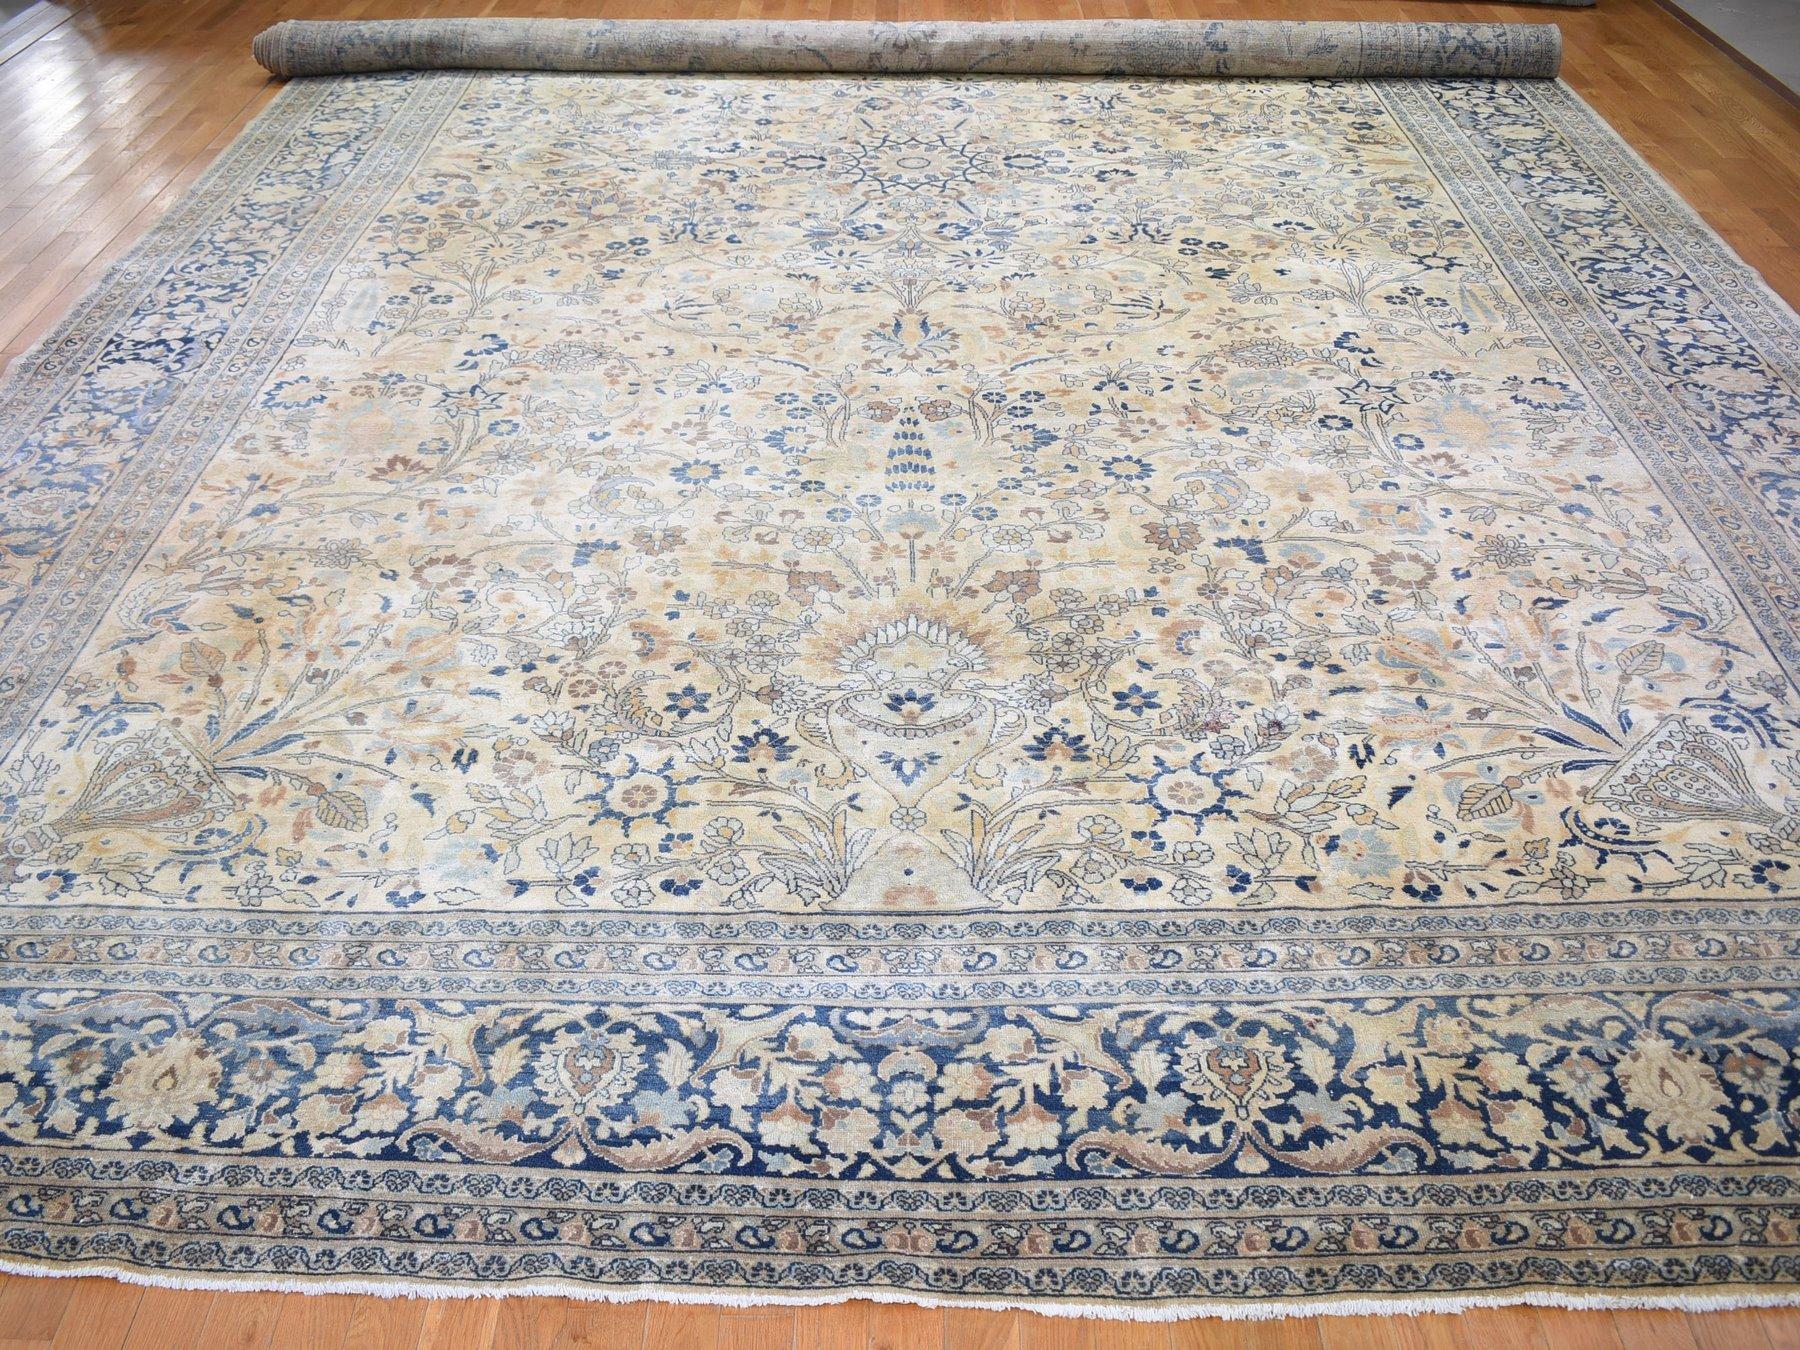 This fabulous hand knotted carpet has been created and designed for extra strength and durability. This rug has been handcrafted for several months in the traditional method that is used to make Rugs. This is truly a one-of-kind piece. 

Exact rug